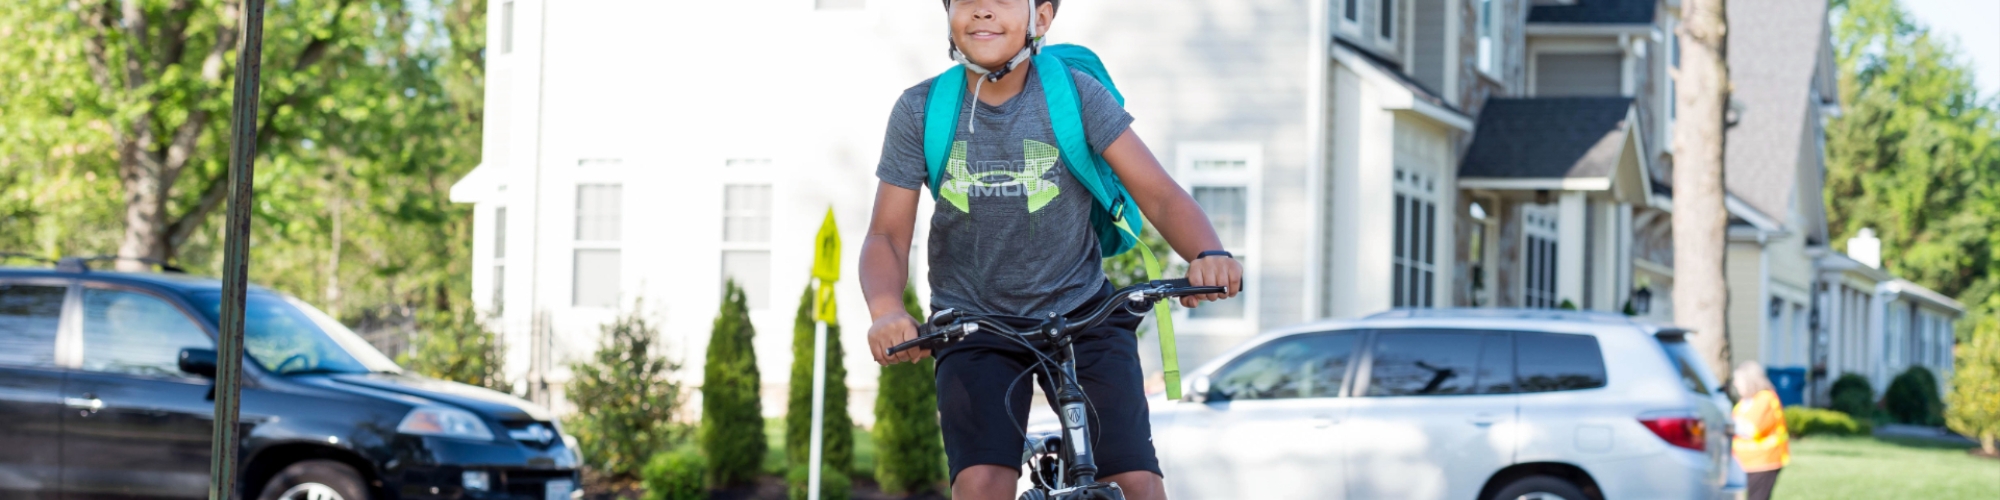 Male student riding a bike to school